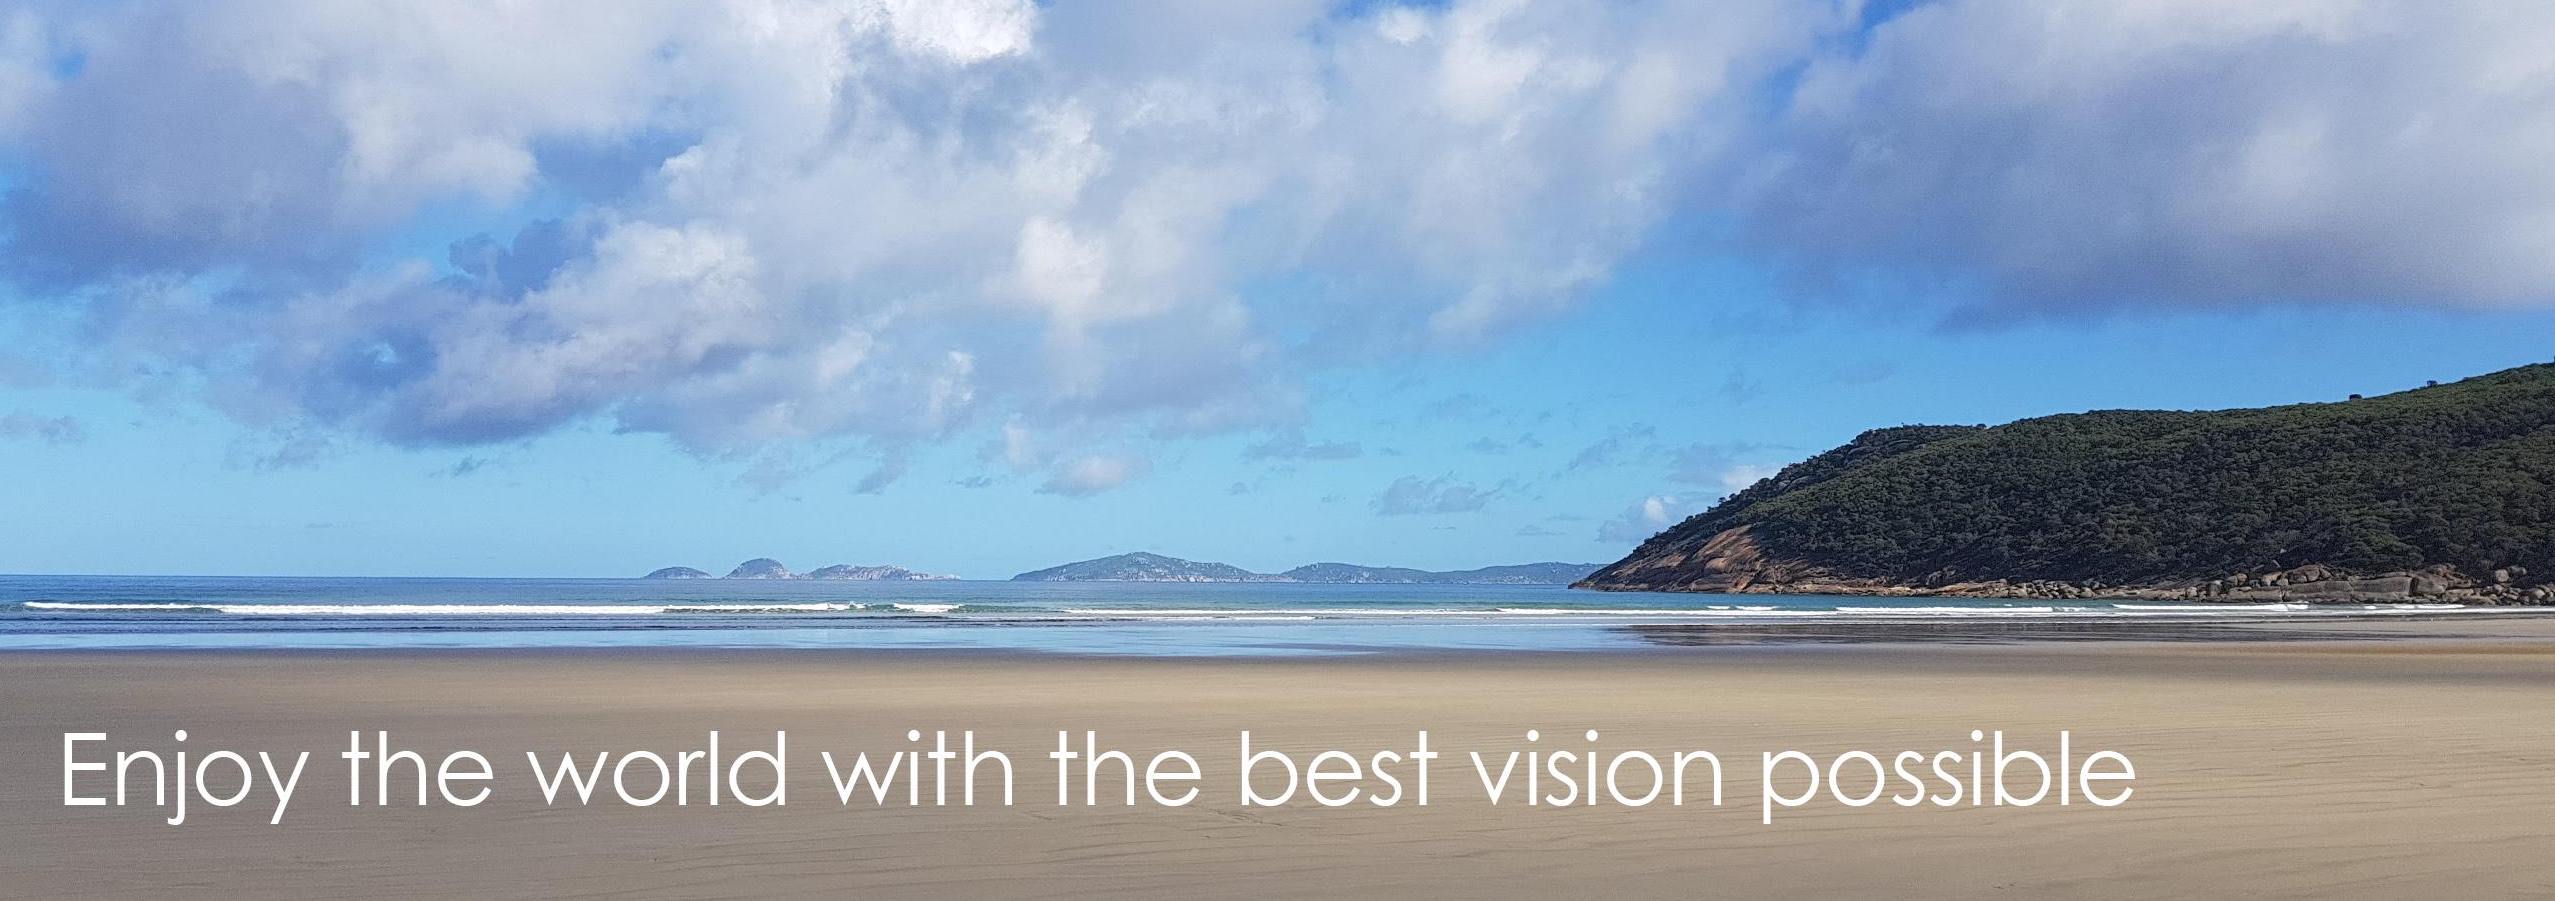 Enjoy the world with the best vision possible